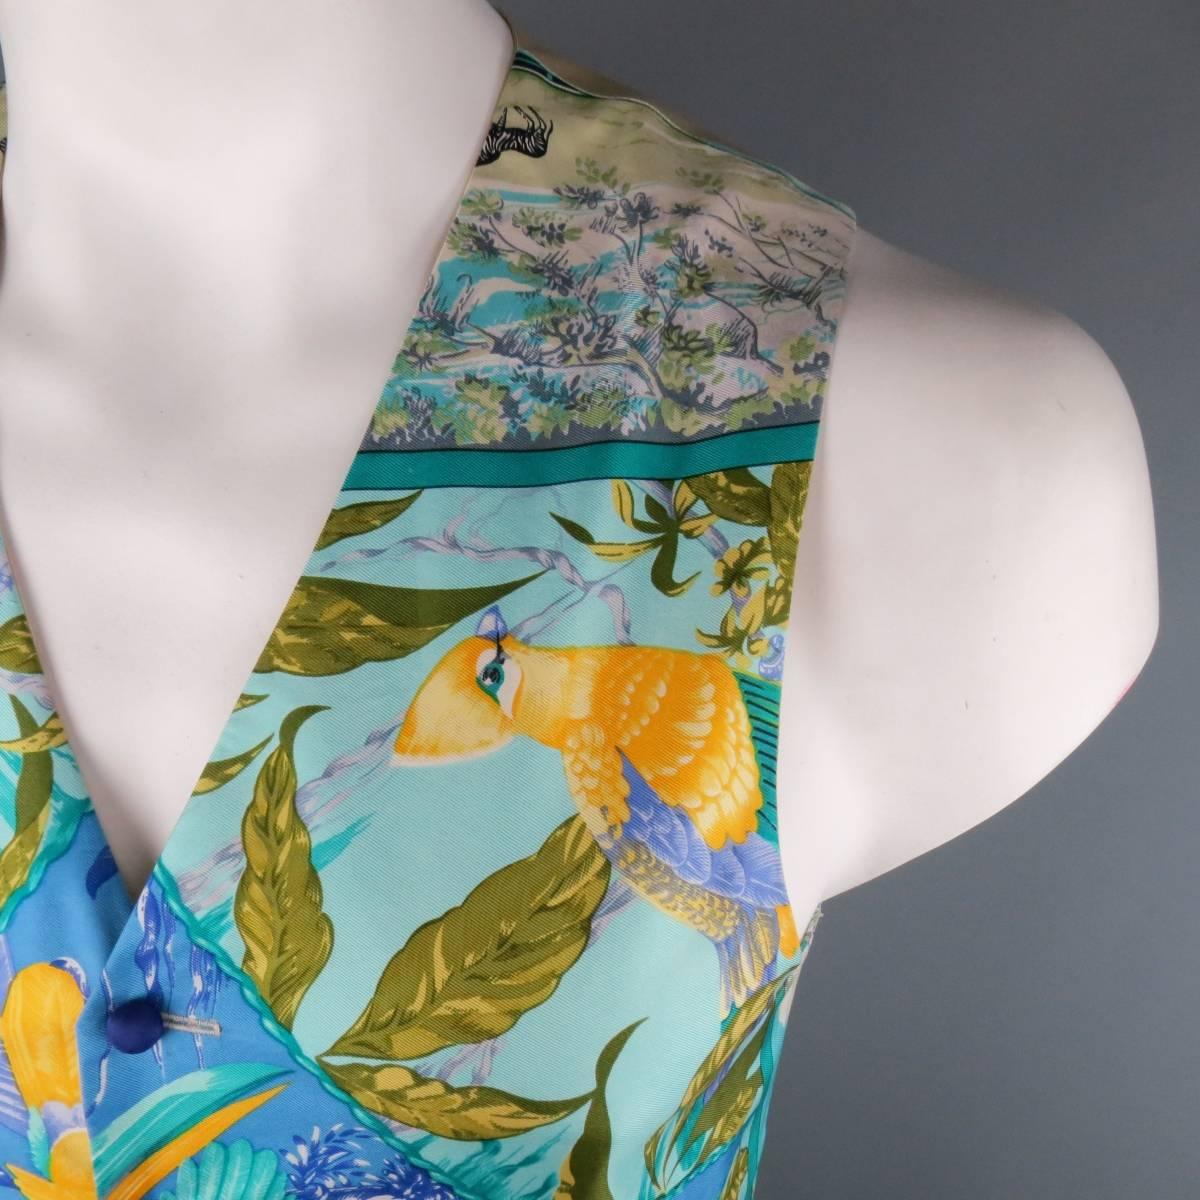 BRENDA KETT of San Francisco custom made vest featuring a vibrant turquoise and blue tropical bird print HERMES scarf front with yellow and lavender accents with silk covered buttons, and champagne satin twill back. Stain in detail shot.
 
Good